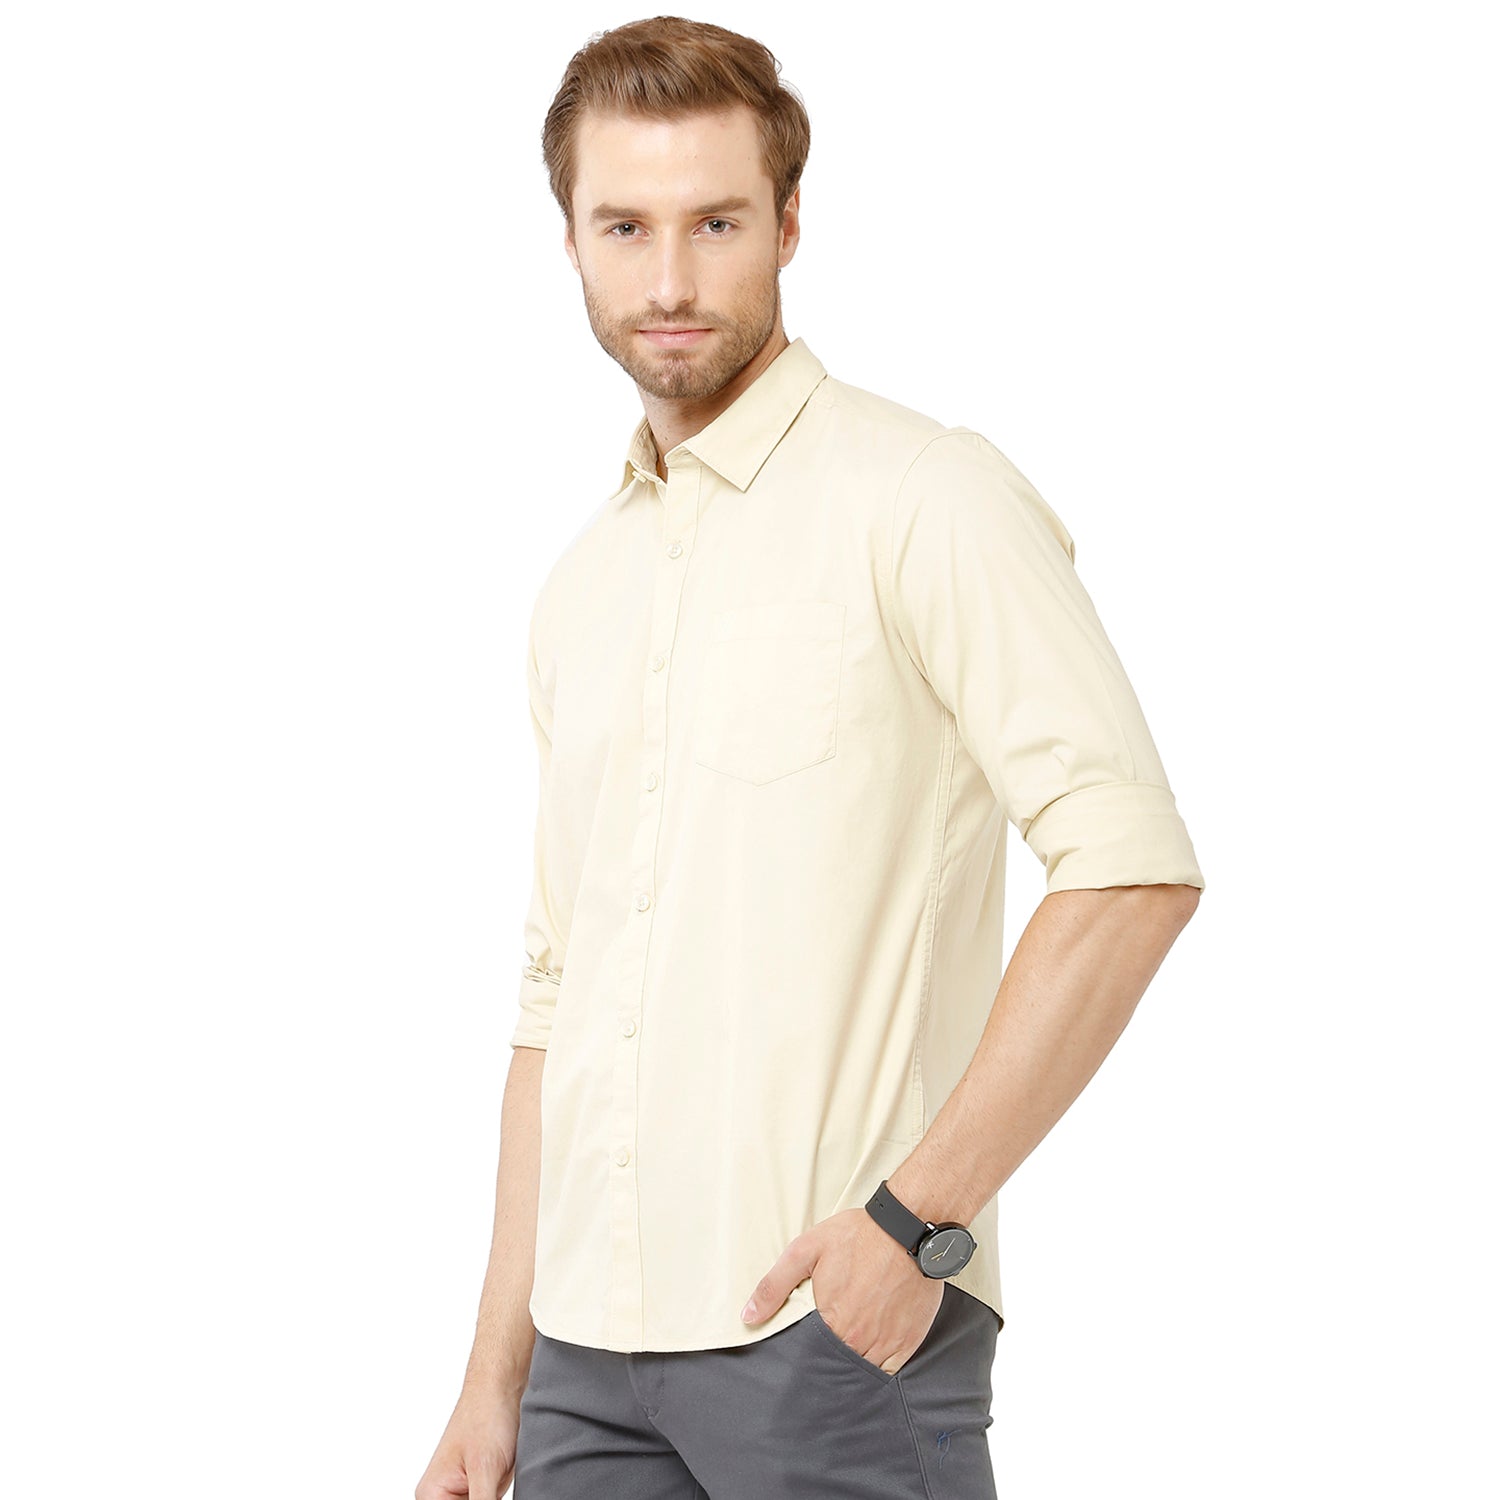 Classic Polo Mens 100% Cotton Full Sleeve Solid Slim Fit Cream Yellow Color Woven Shirt -SN1 115 B Classic Polo 